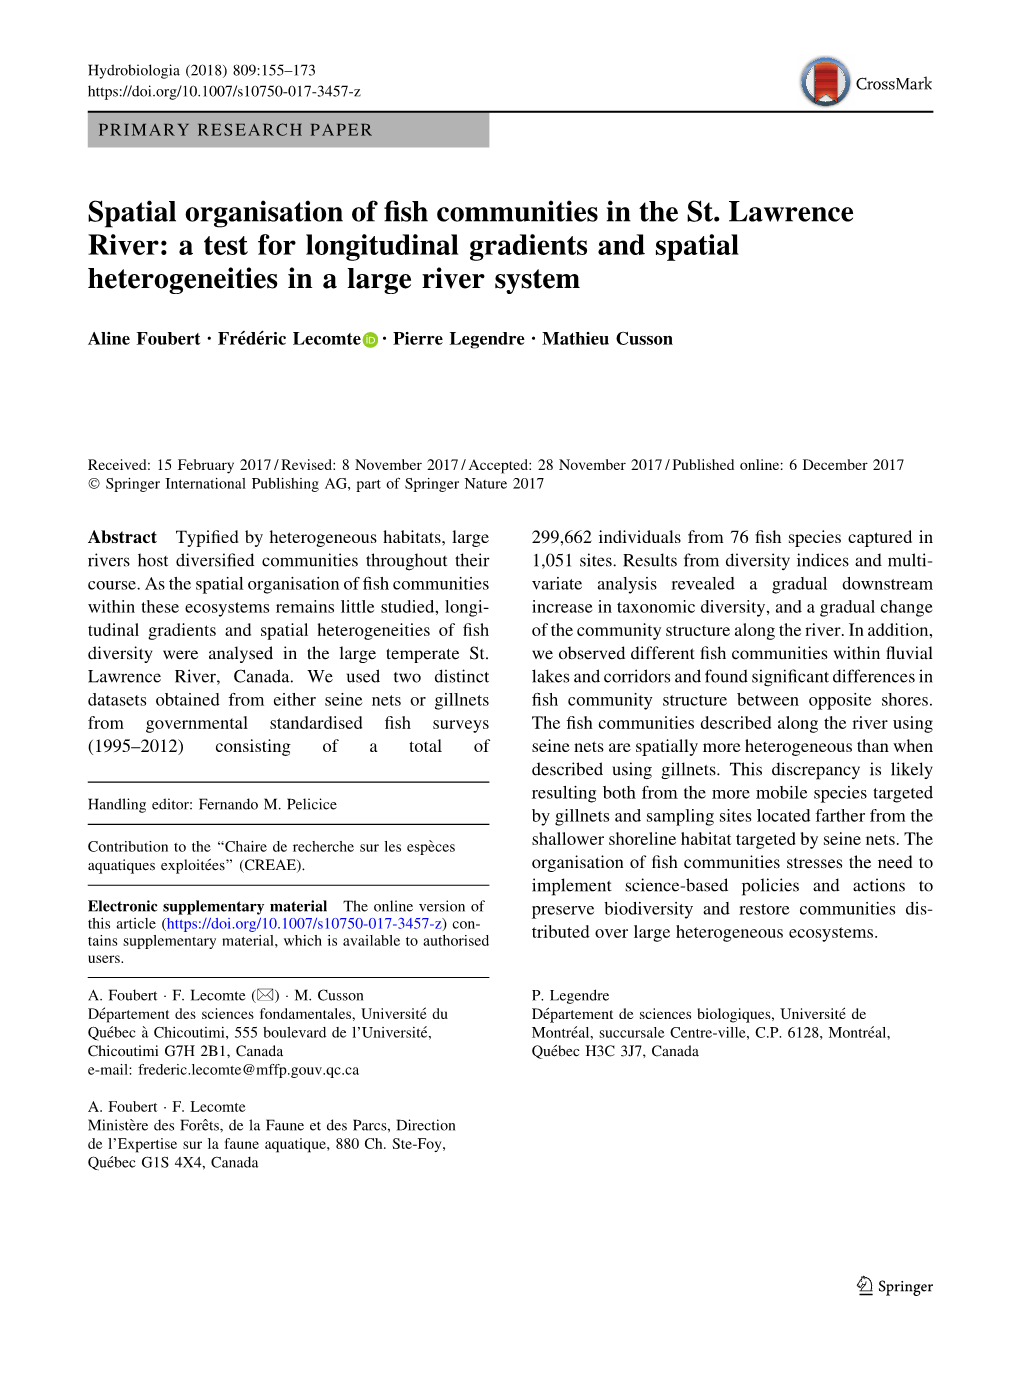 Spatial Organization of Fish Communities in the St. Lawrence